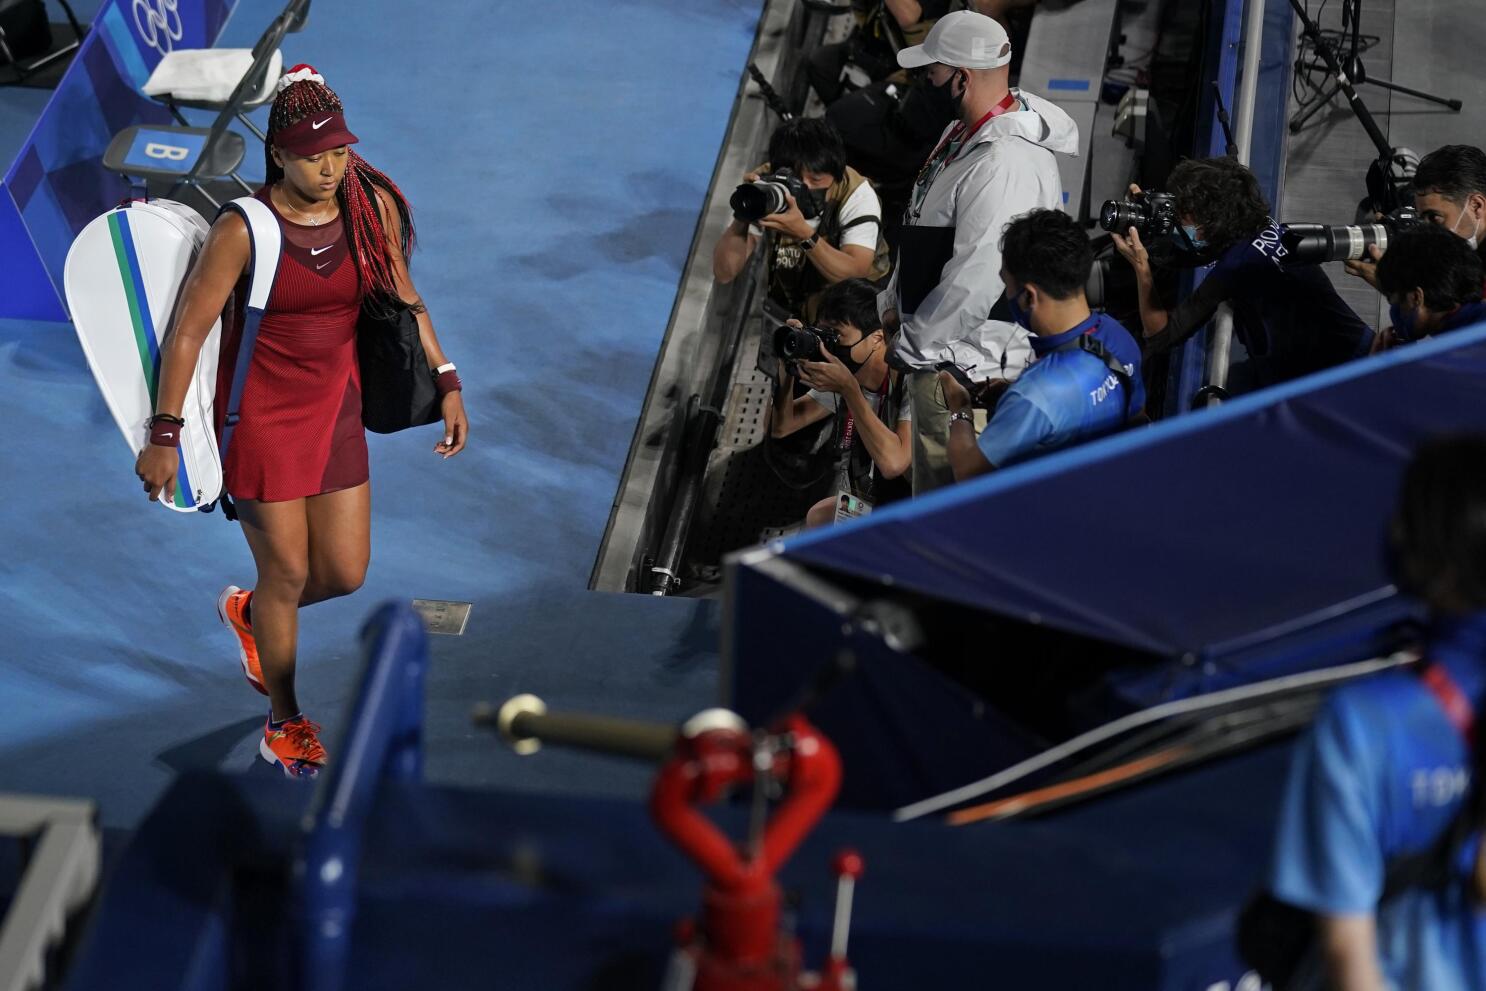 Naomi Osaka Shares Concerns Of Being A Bad Mom, Fans Support